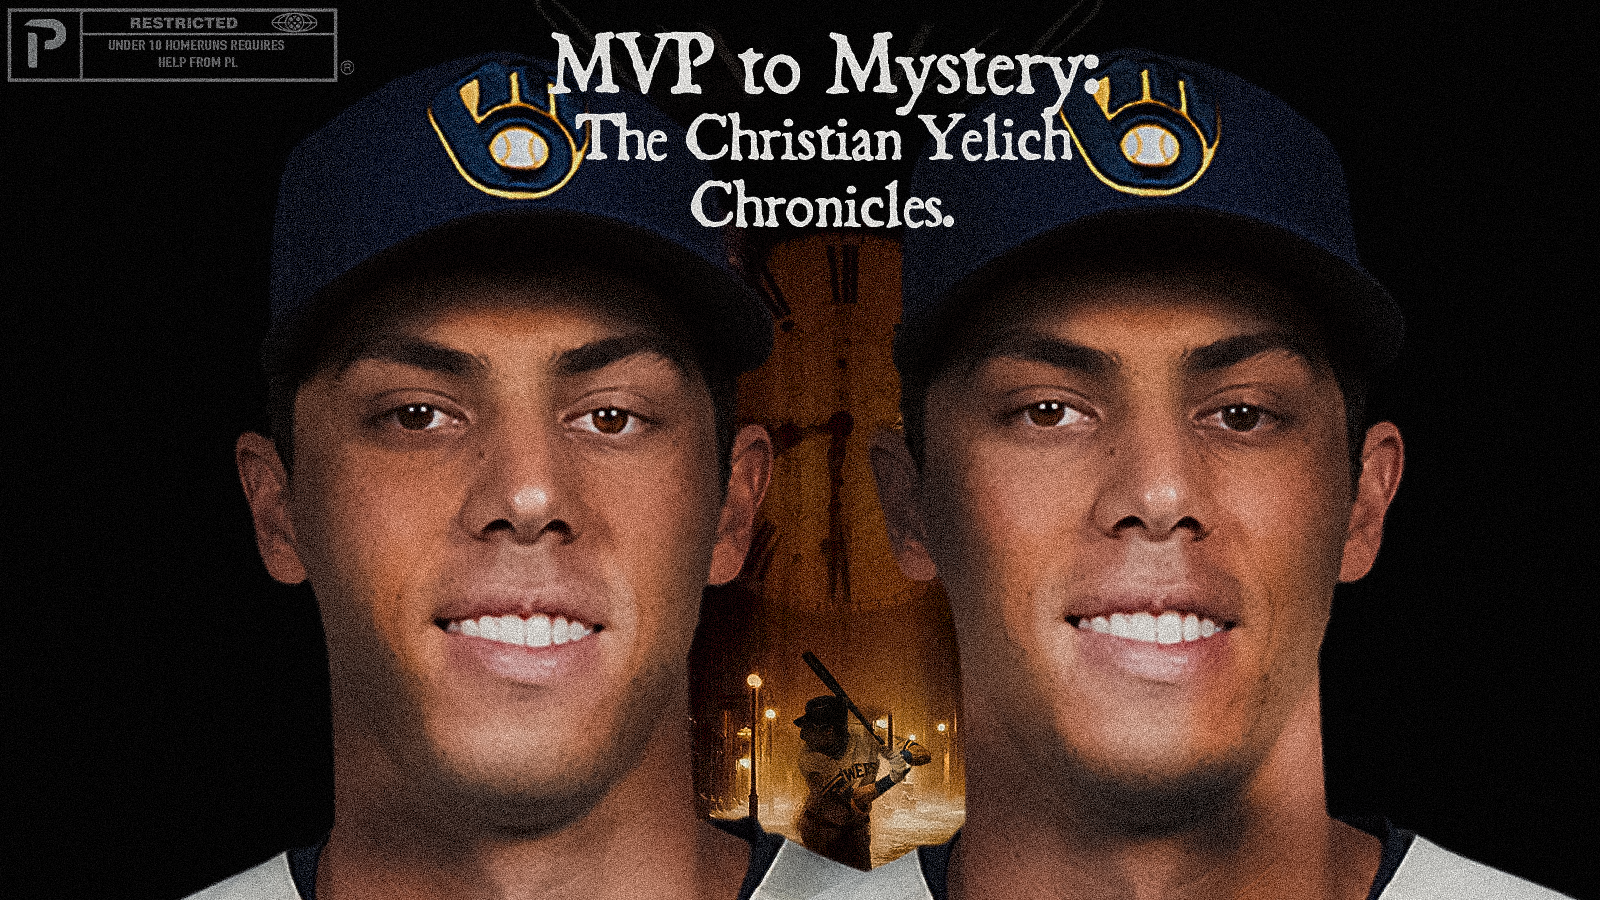 Brewers: Where has Christian Yelich's power gone? - Beyond the Box Score